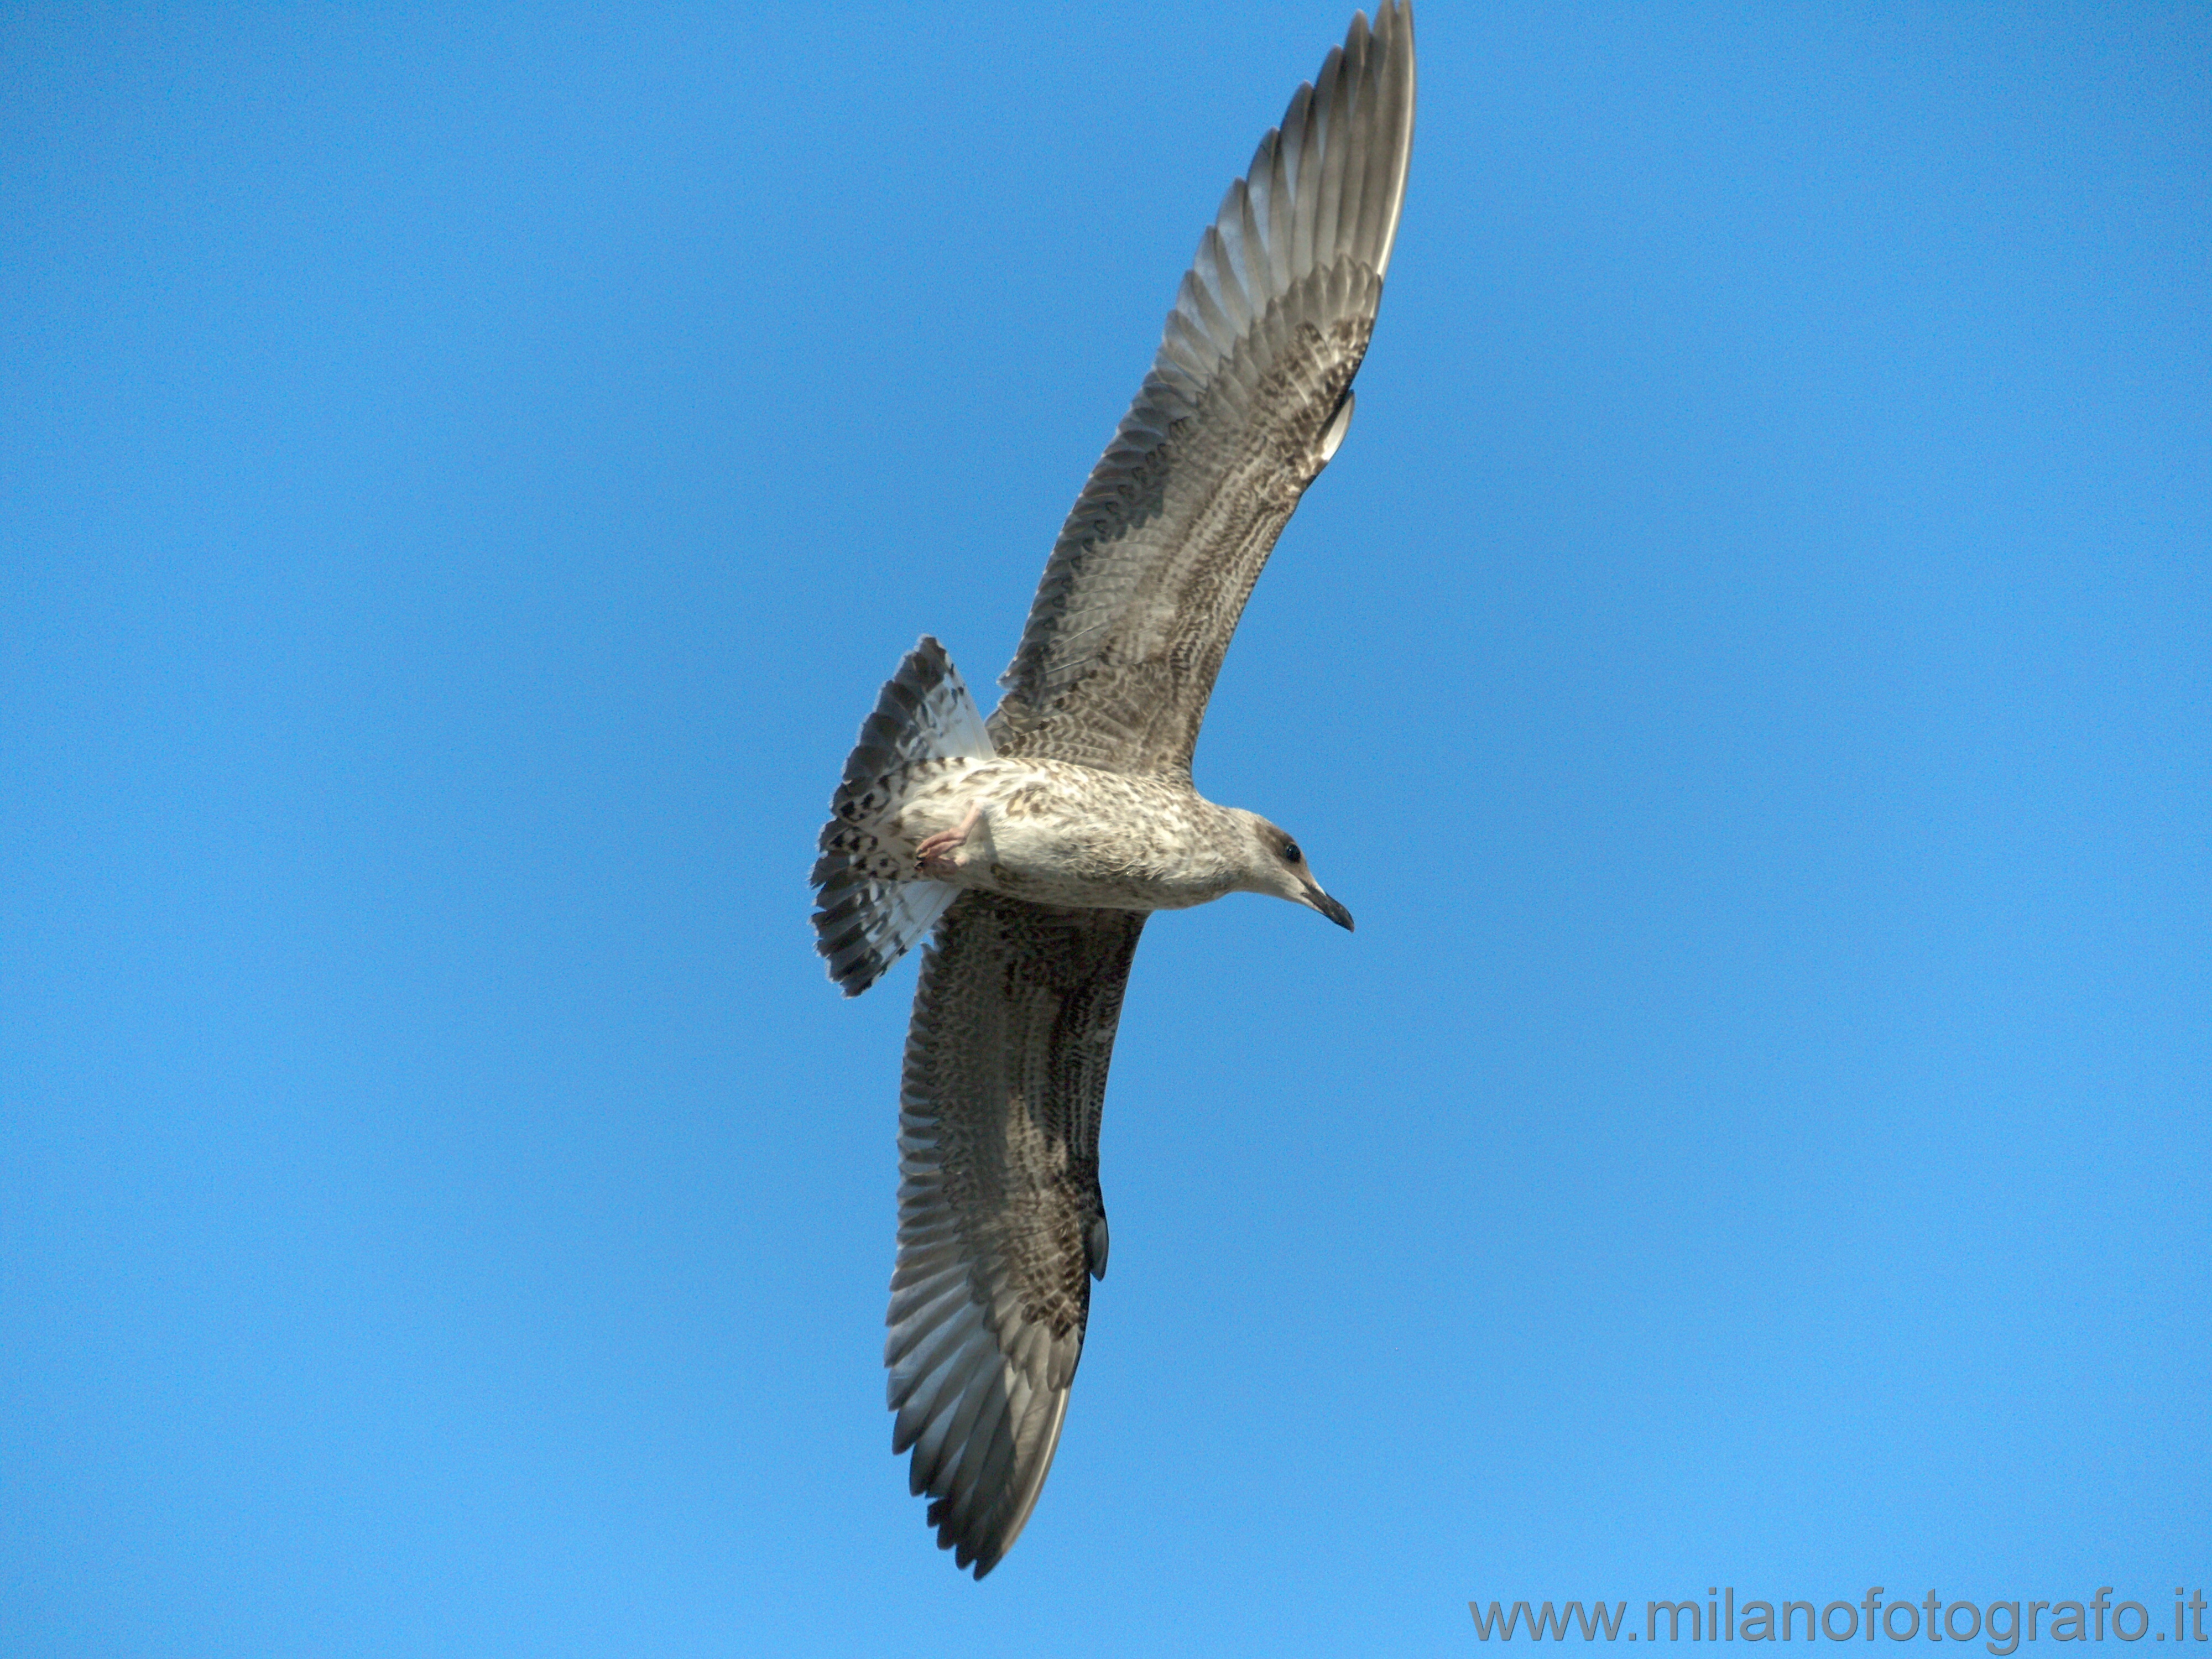 Cattolica (Rimini, Italy): Young herring gull in flight - Cattolica (Rimini, Italy)